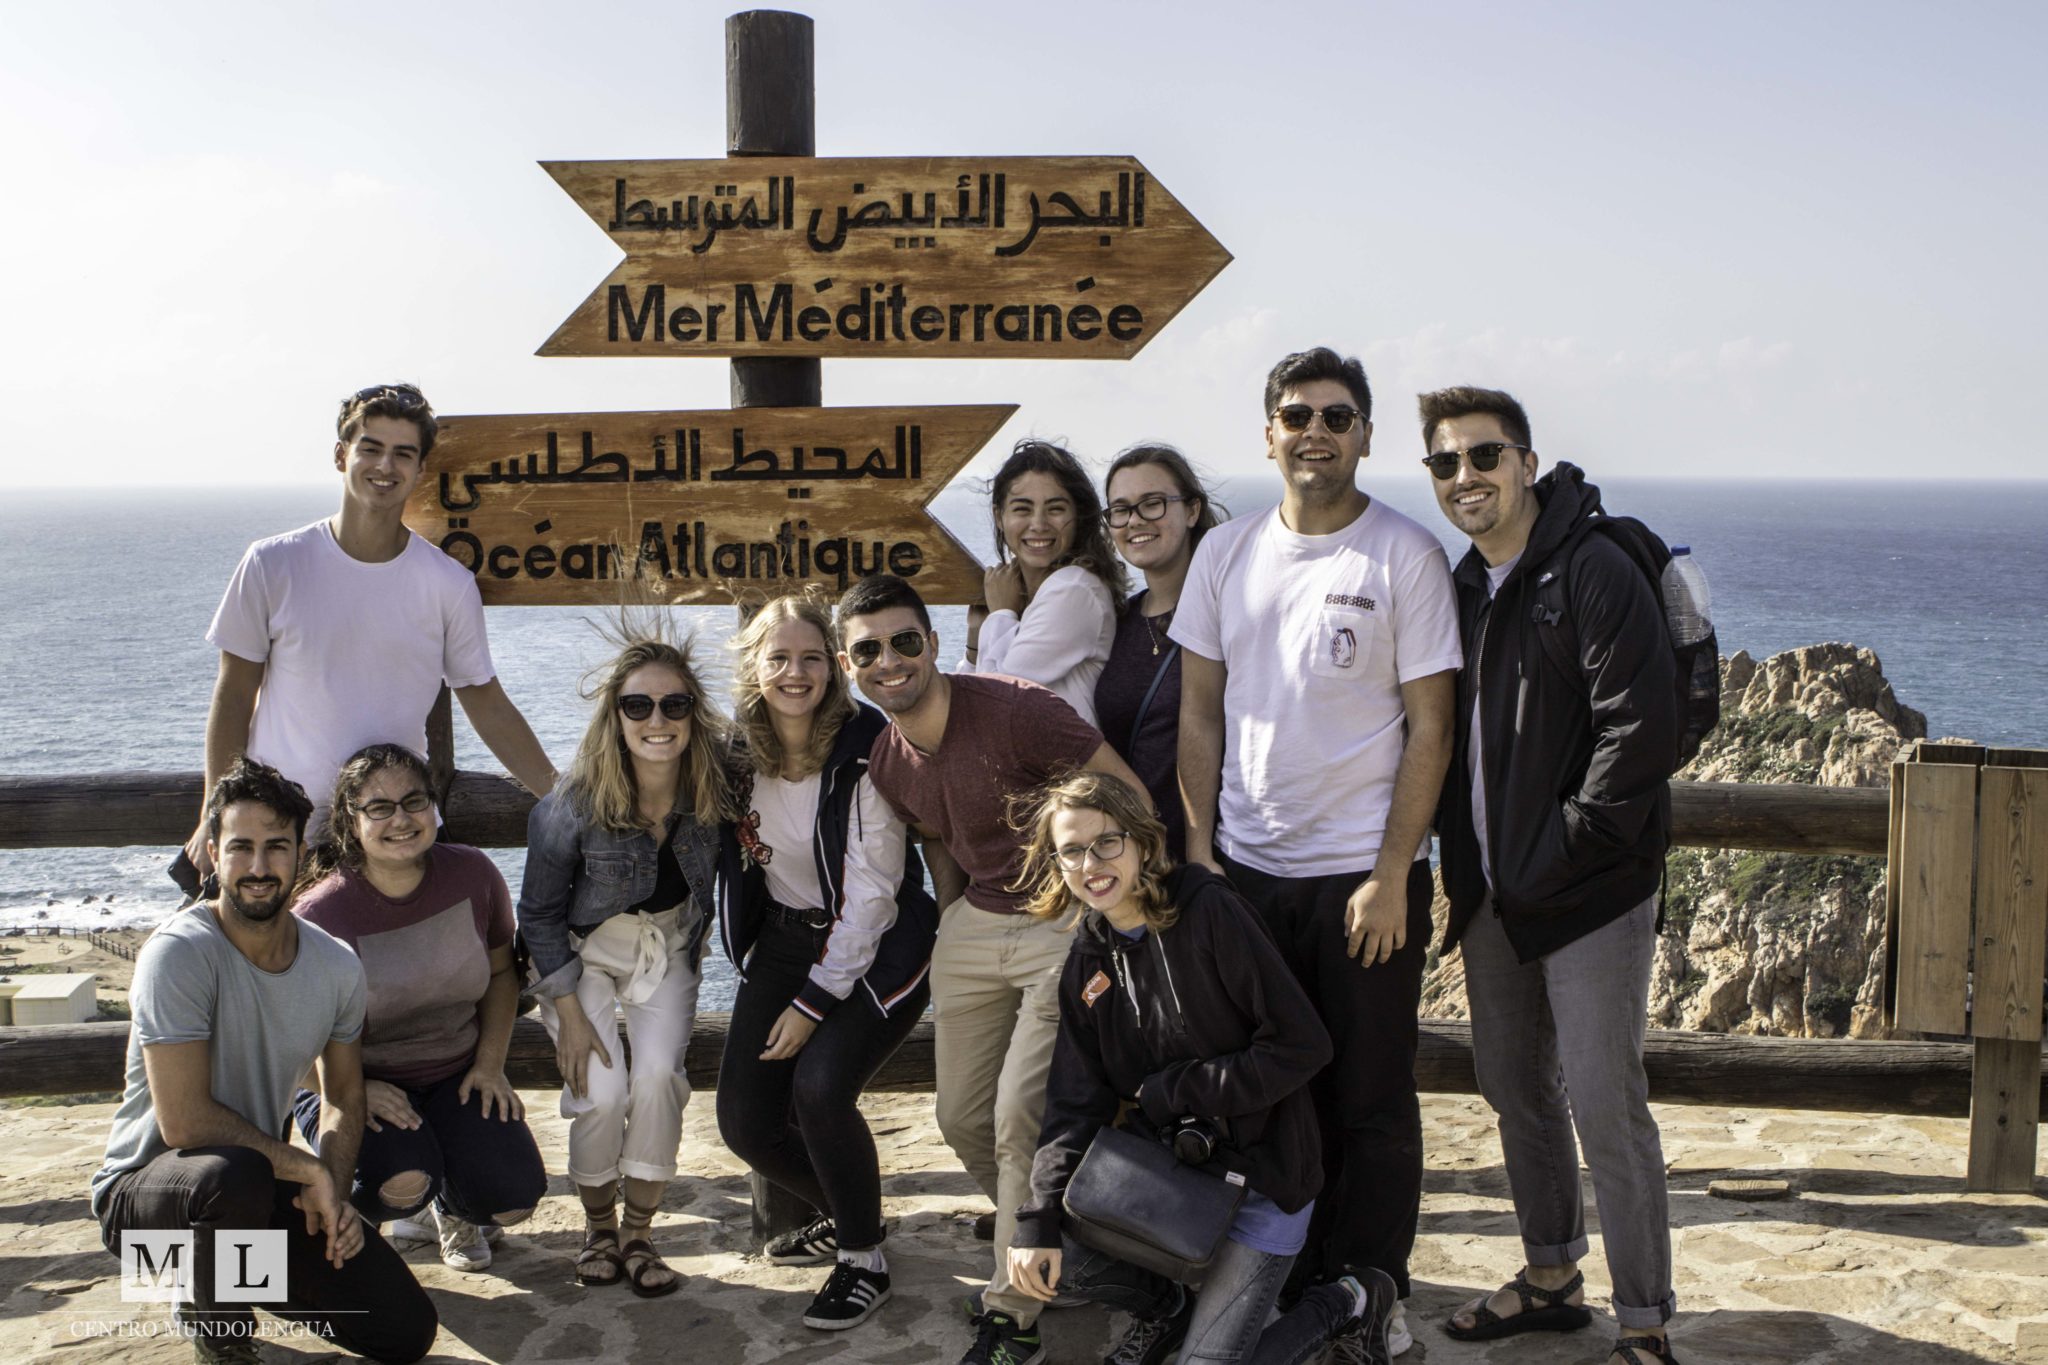 Group excursion to Morocco